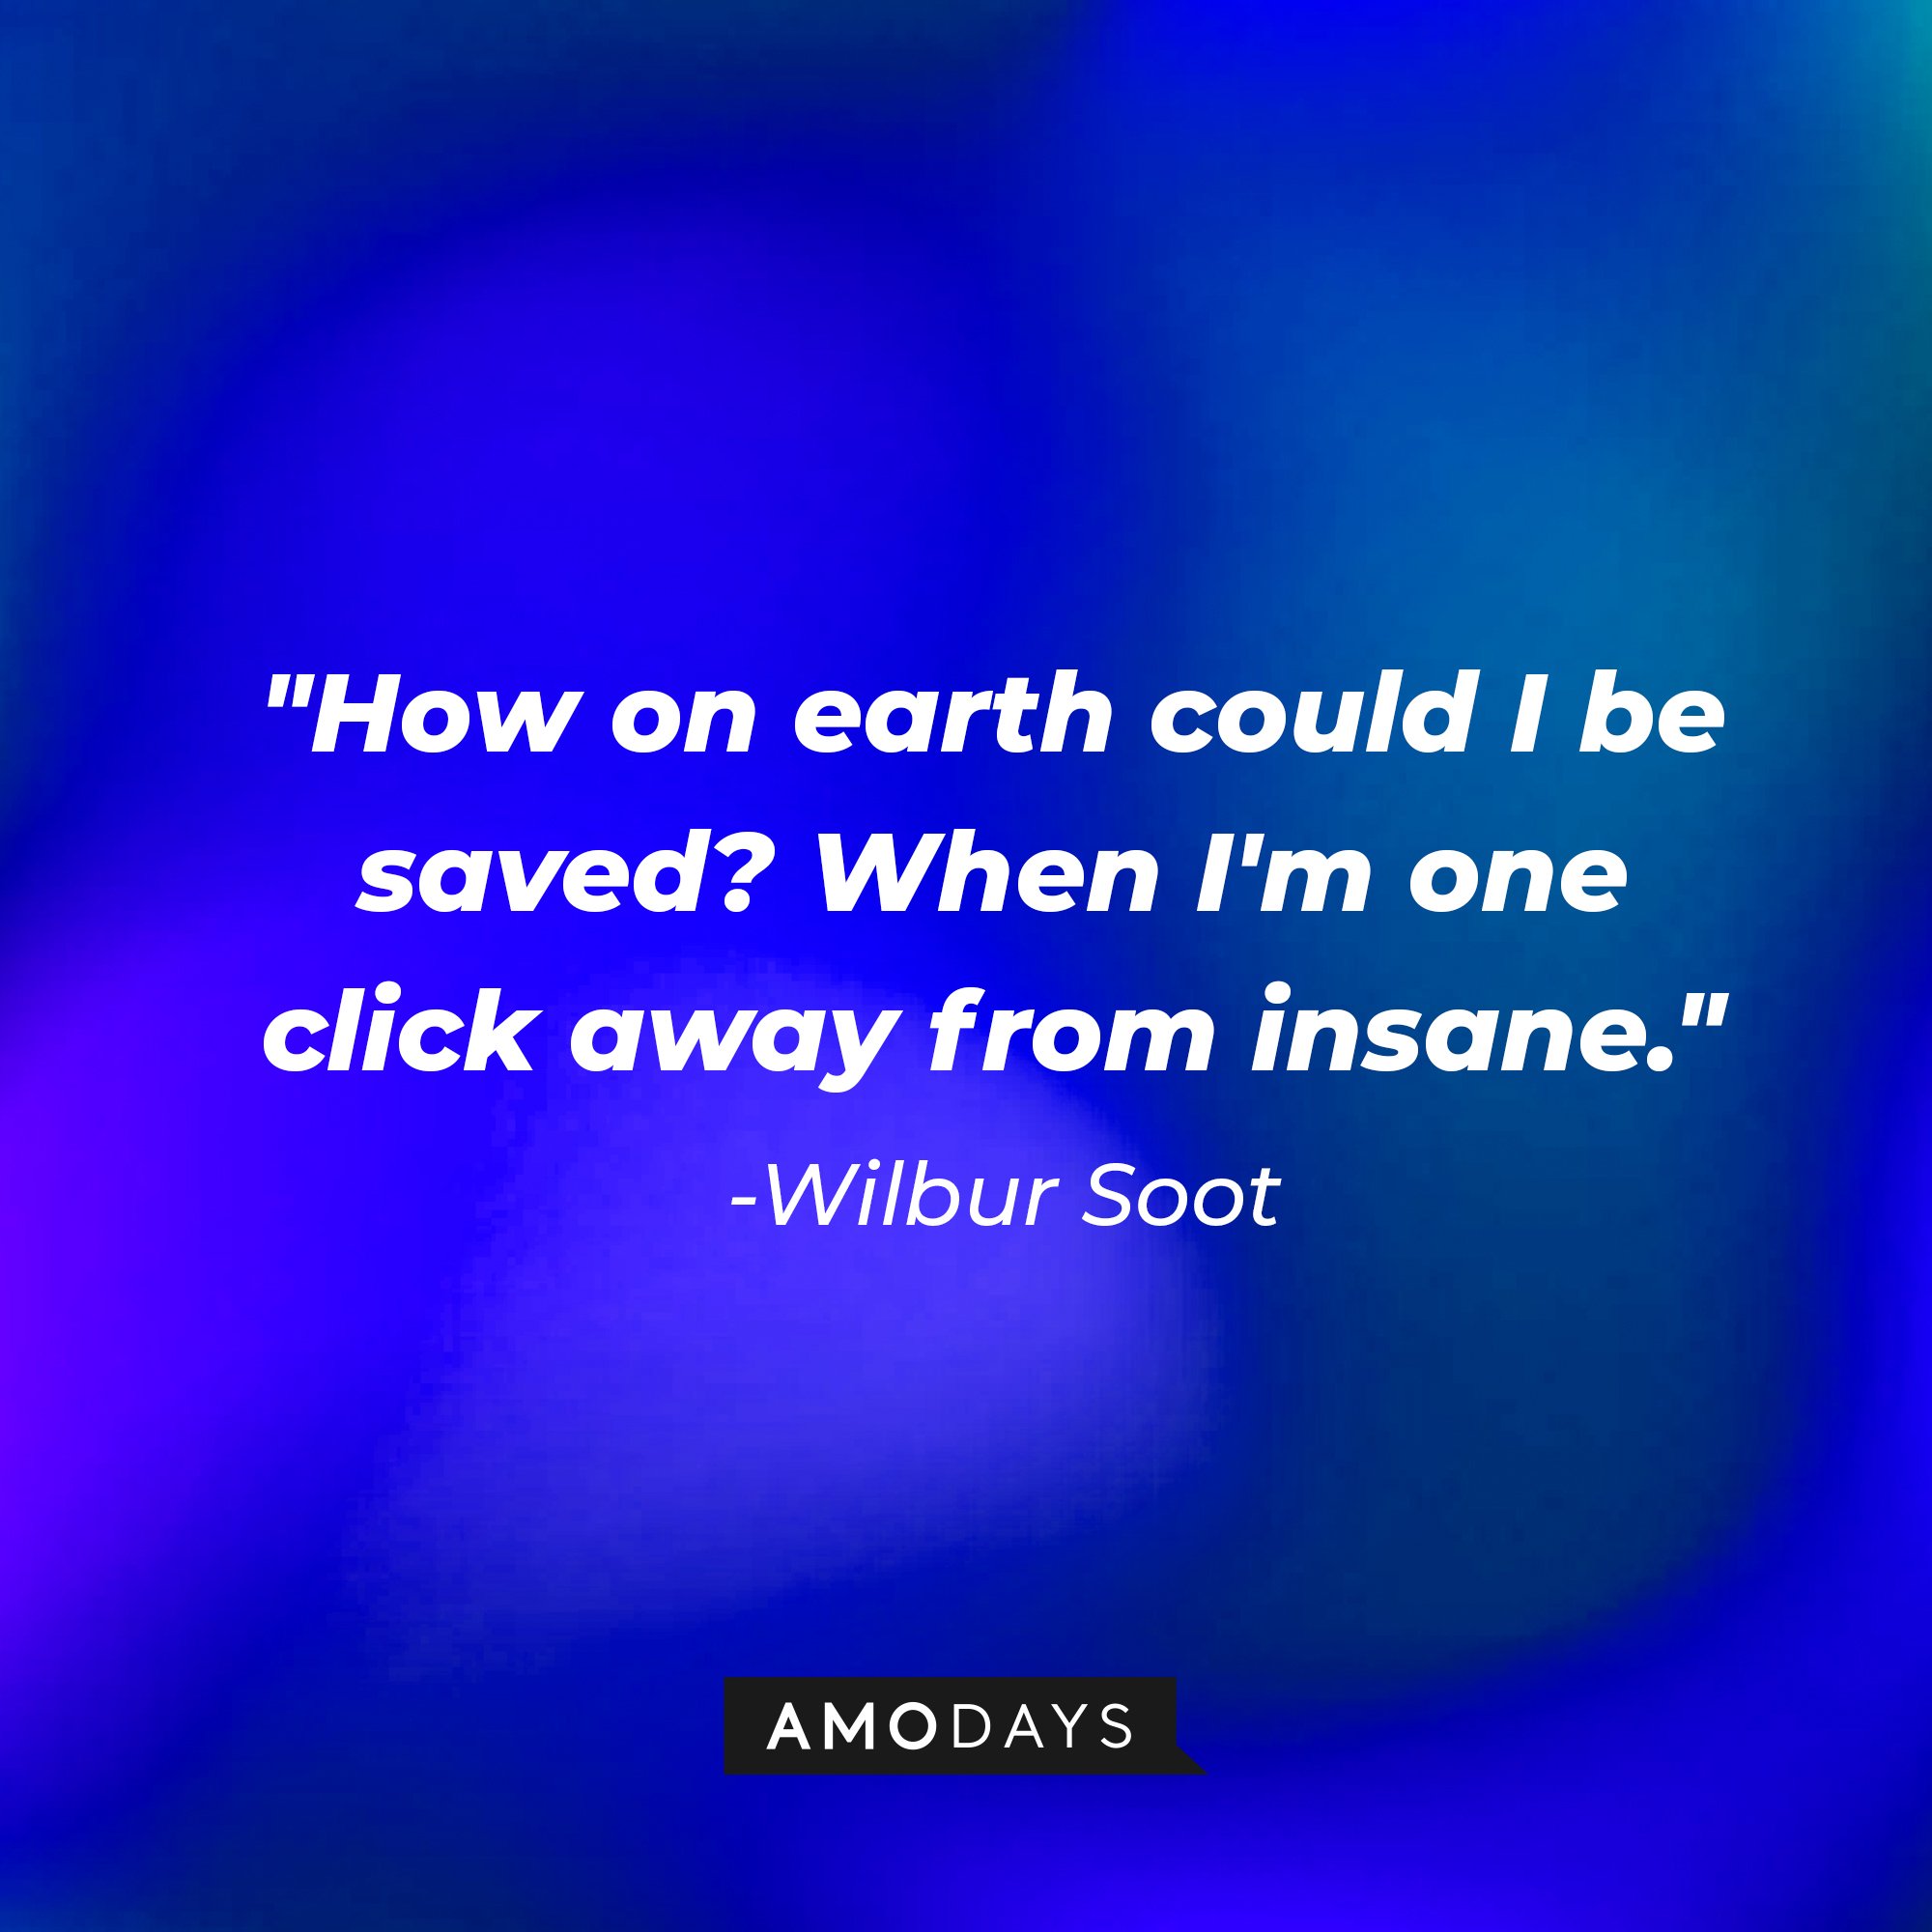 Wilbur Soot's quote: "How on earth could I be saved? When I'm one click away from insane." | Image: AmoDays